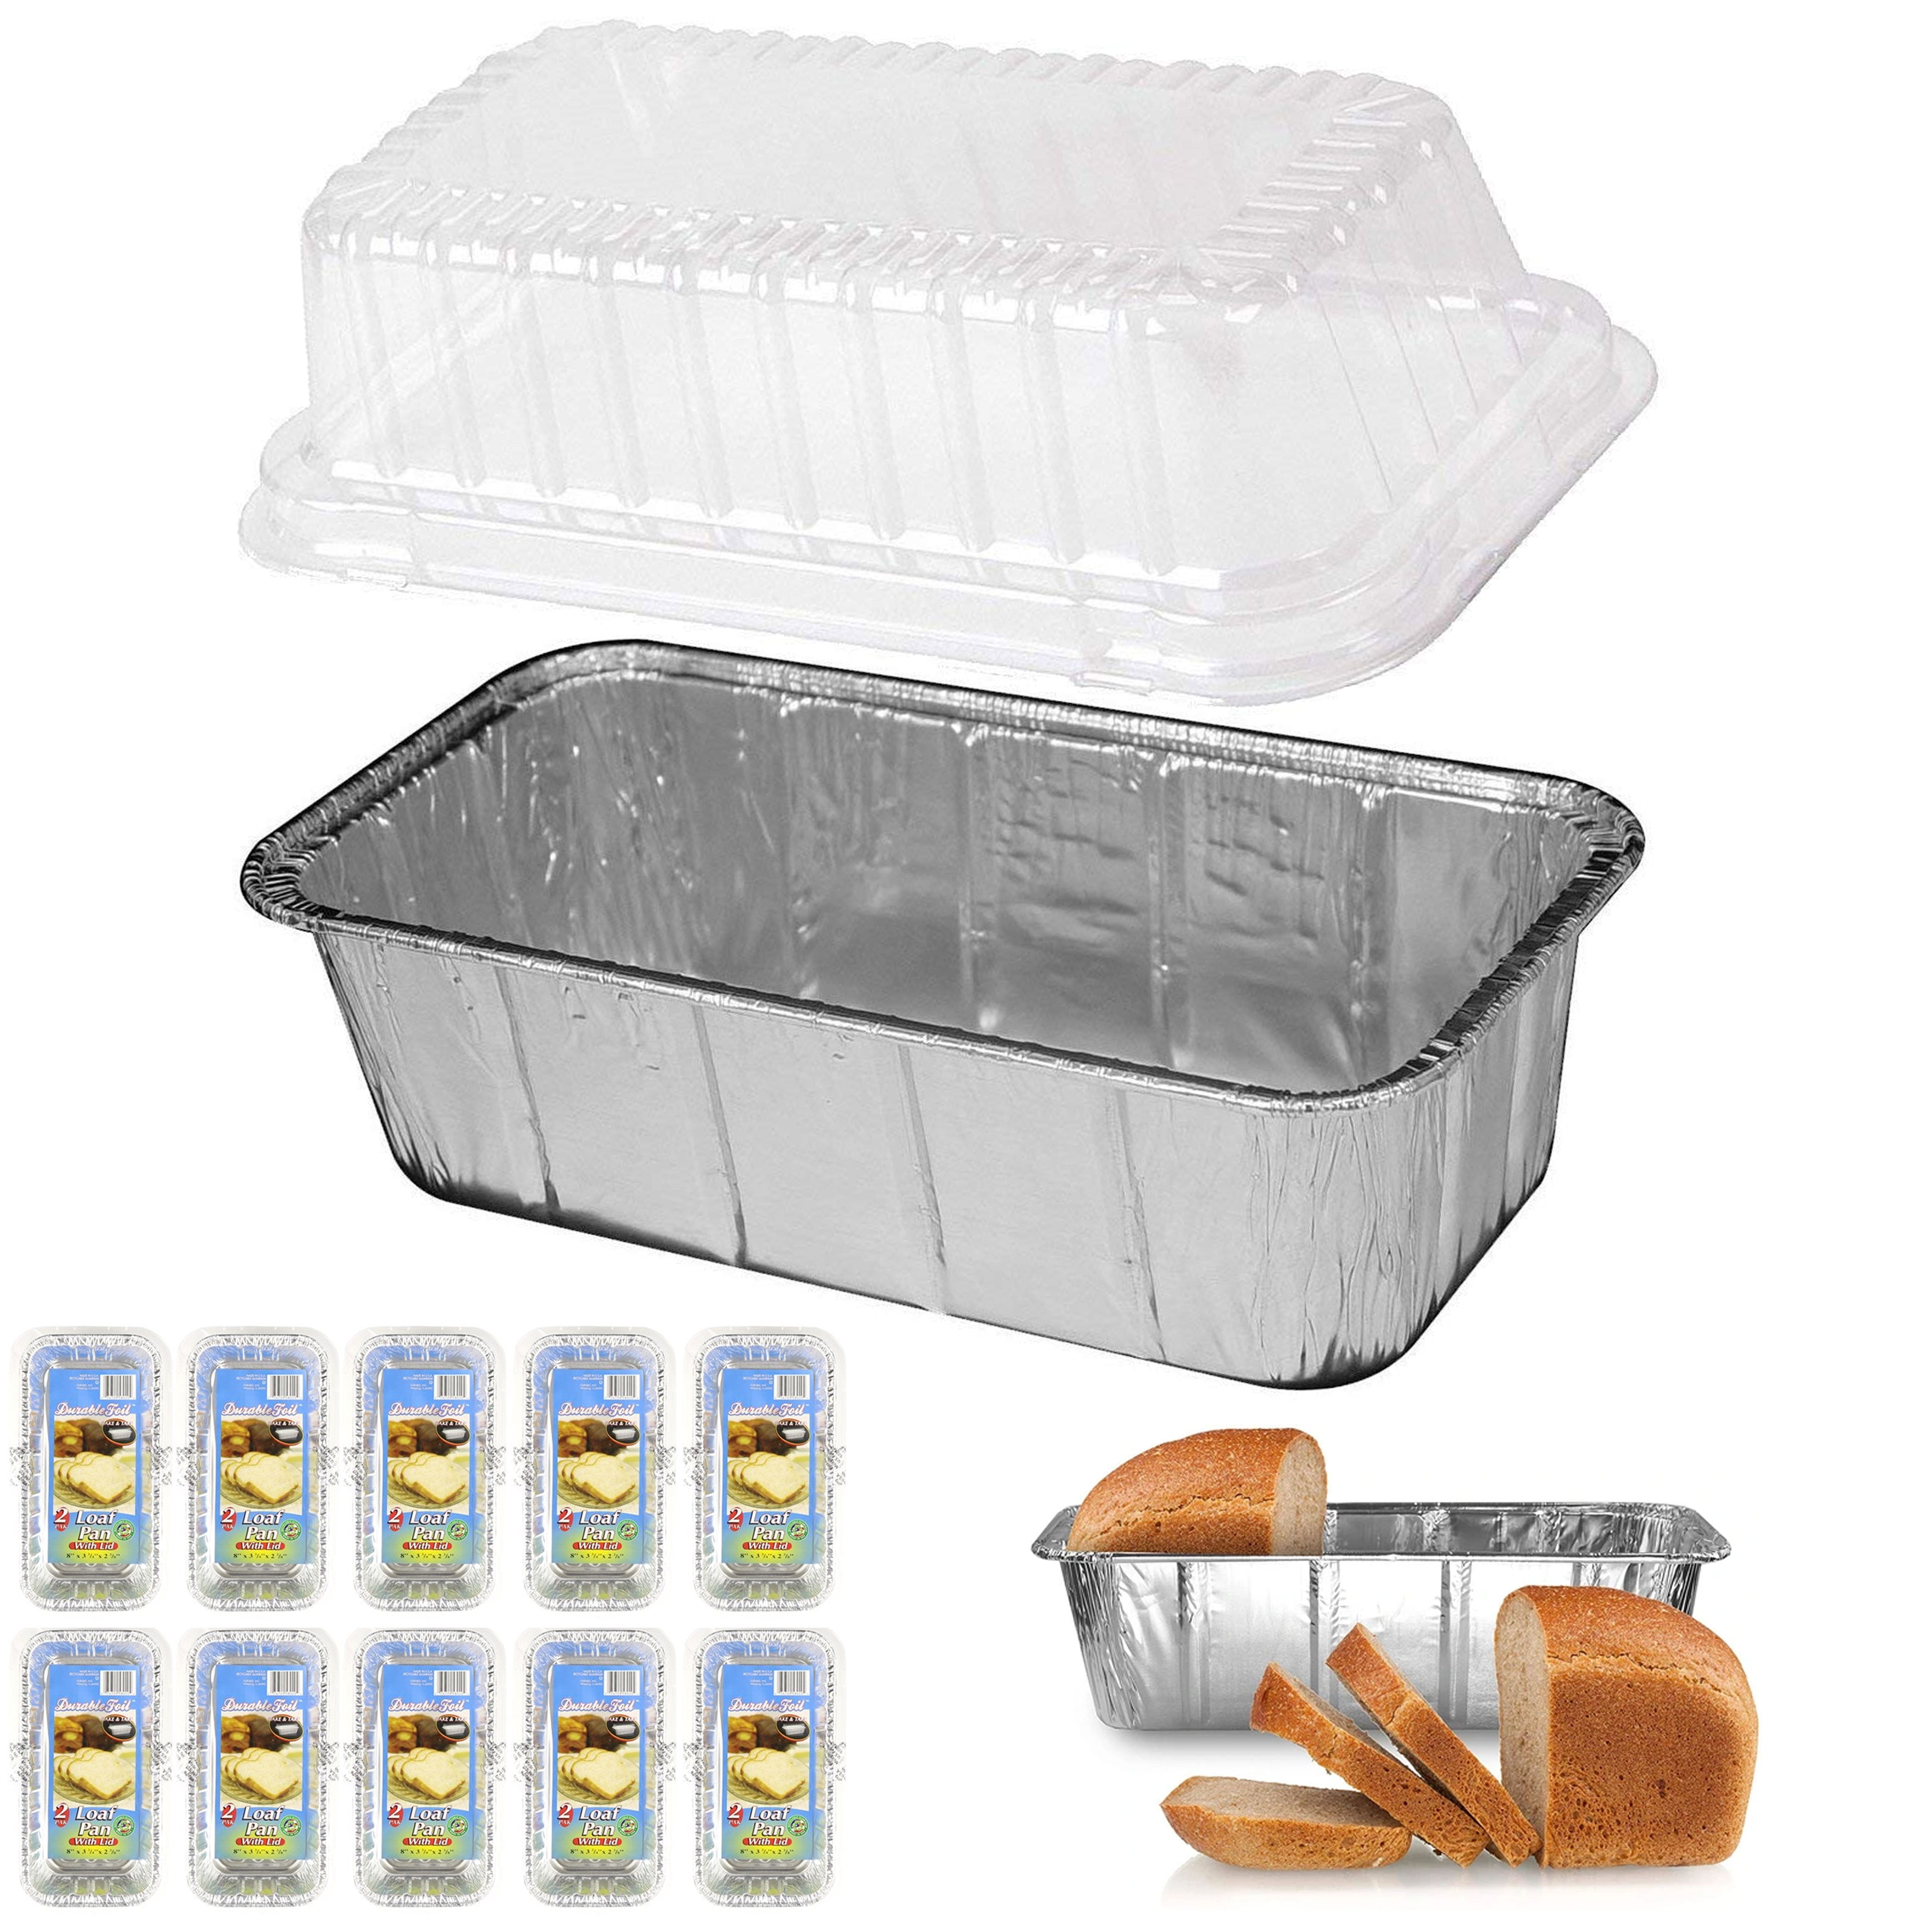 8 x 4.1 x 2.2 IVC Disposable Aluminum Foil Loaf Bread Pan w/Board Lids Pactogo 1 1/2 lb - Heavy Duty Made in USA Pack of 12 Sets 